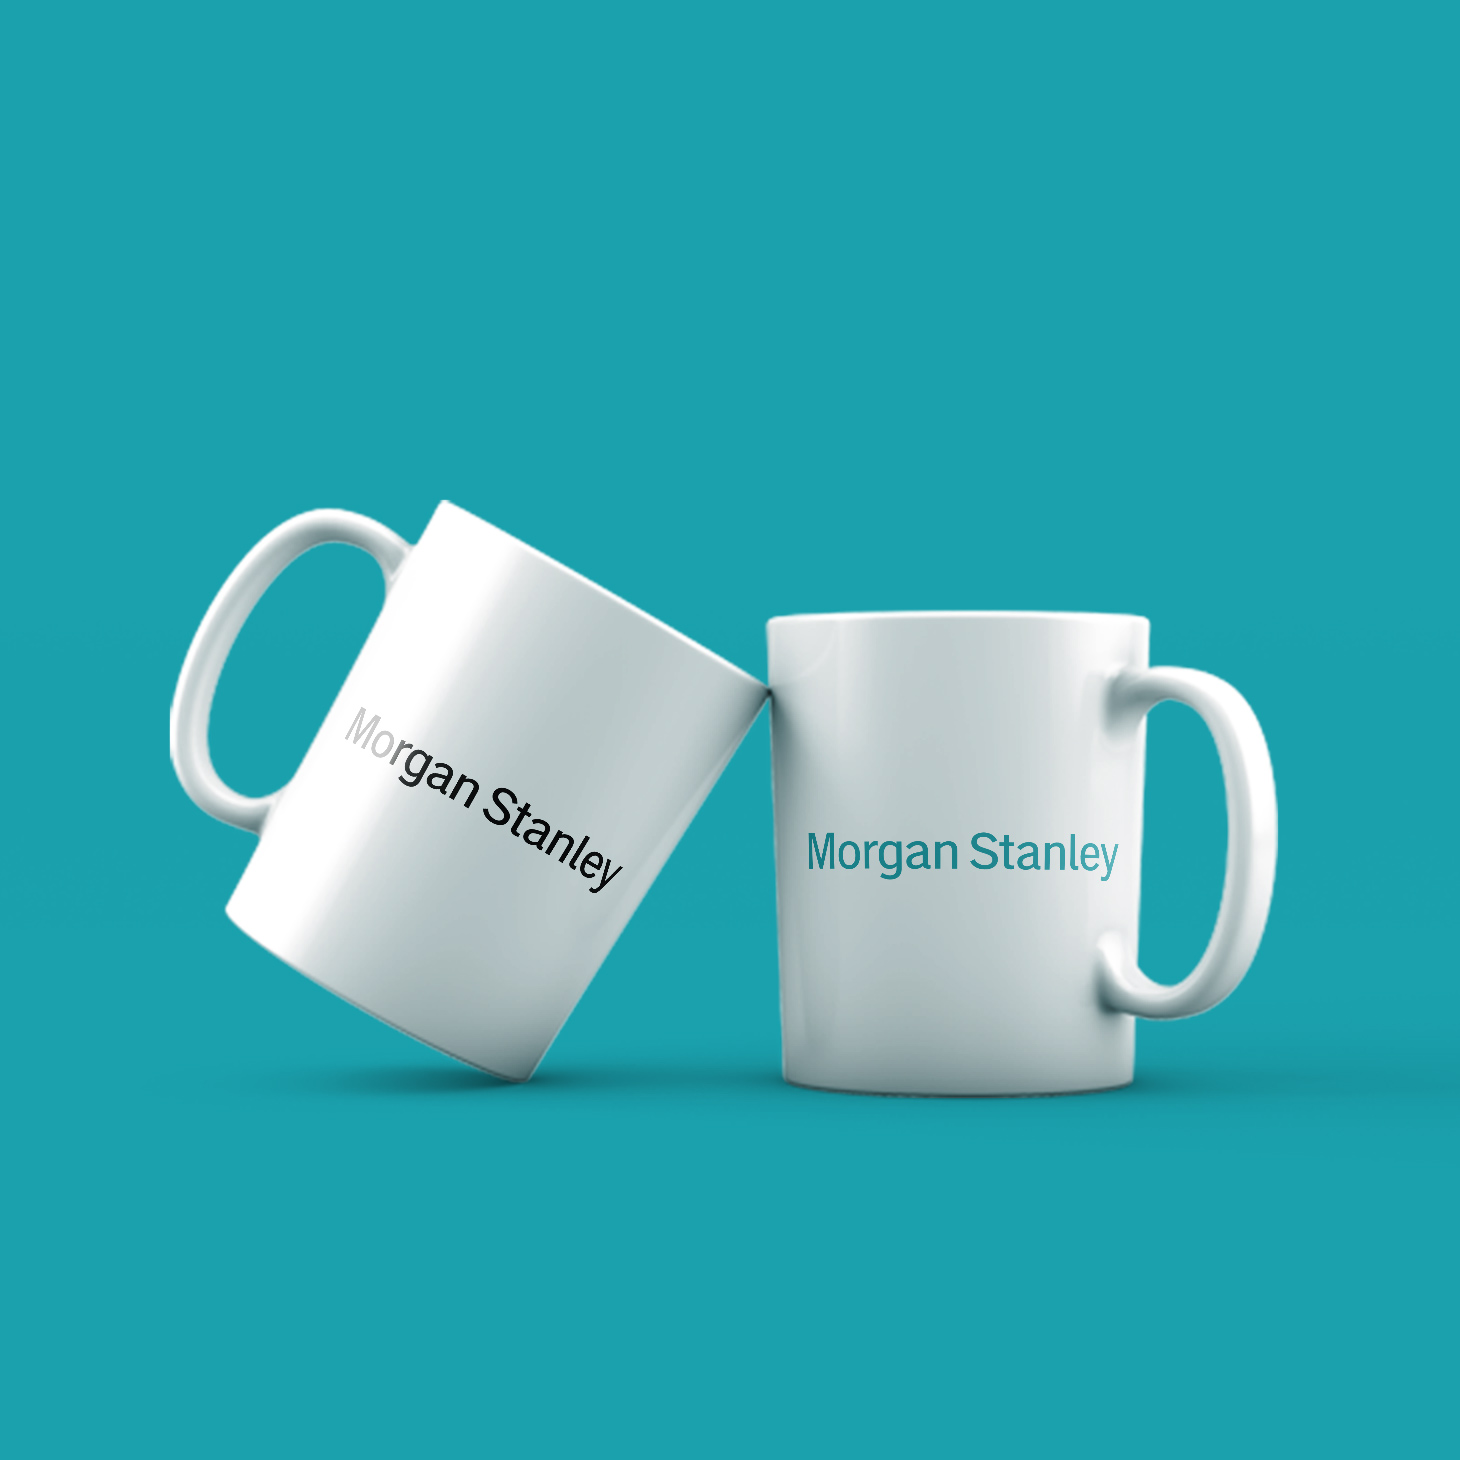 Two sets of white mugs with financial logo company.